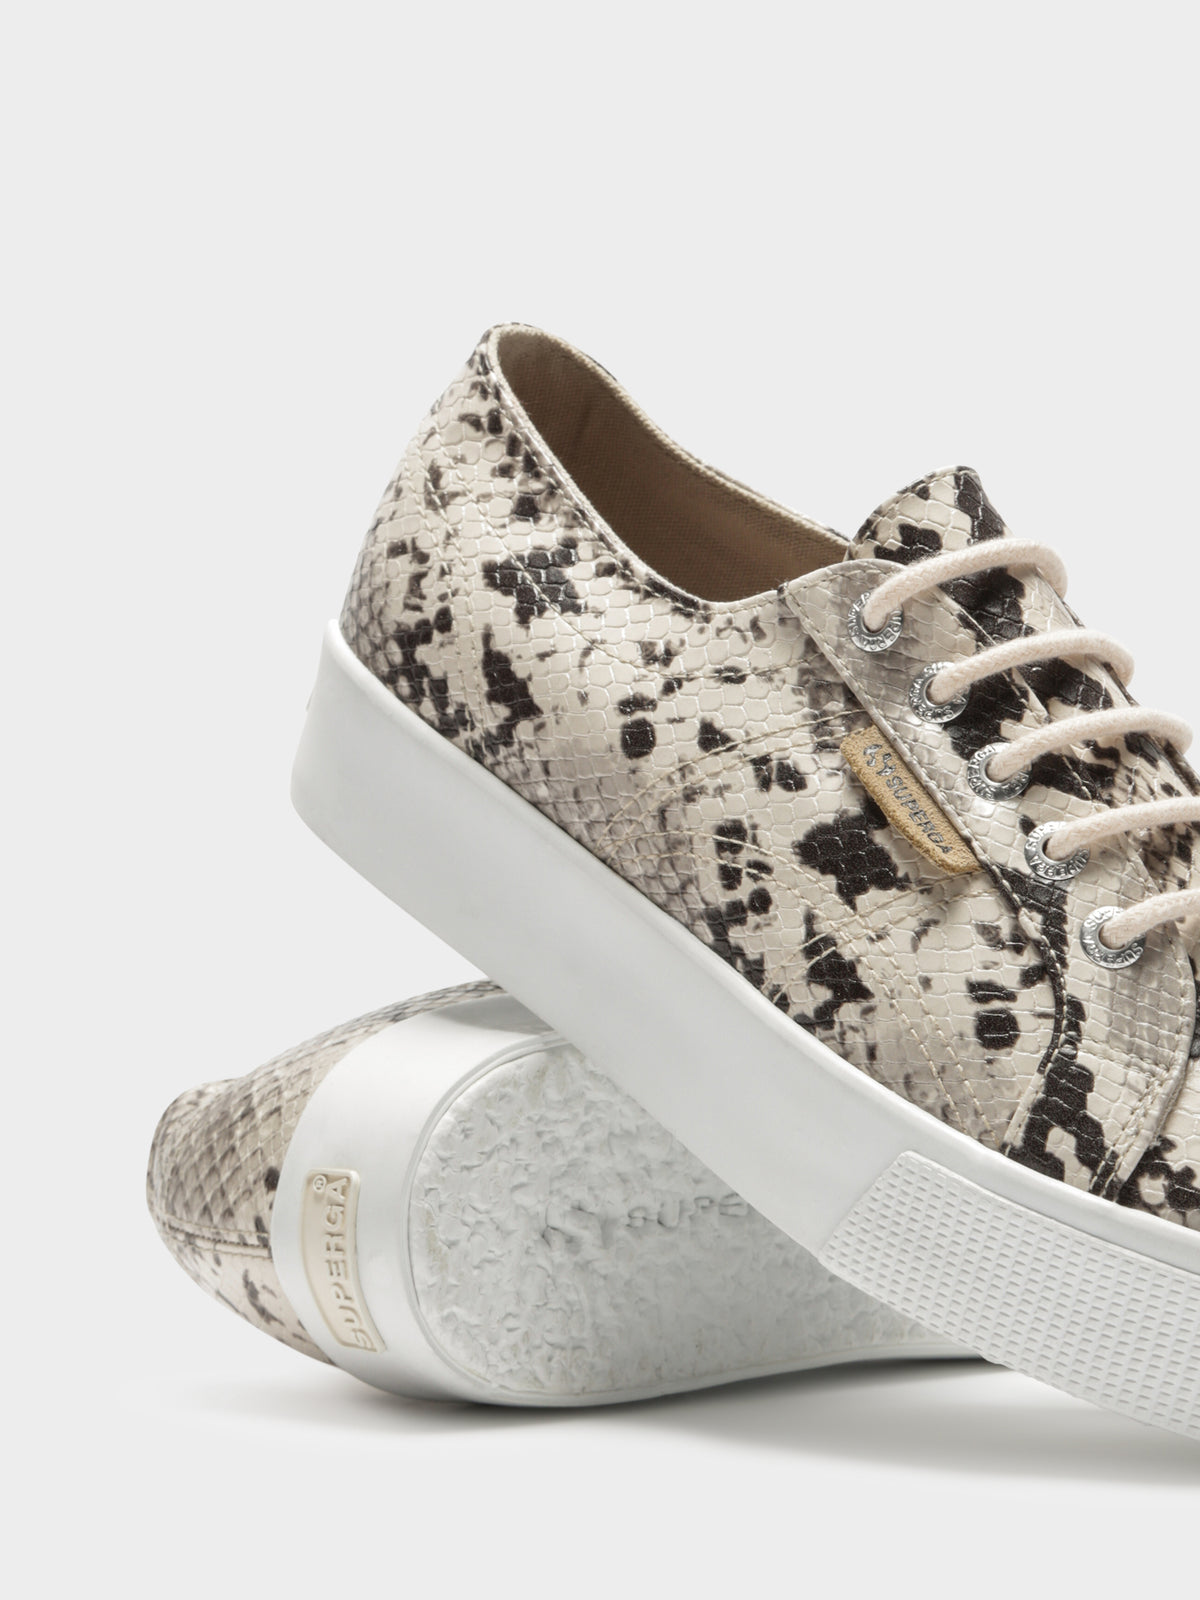 2730 Synthetic Snakeskin Sneakers in Taupe Black